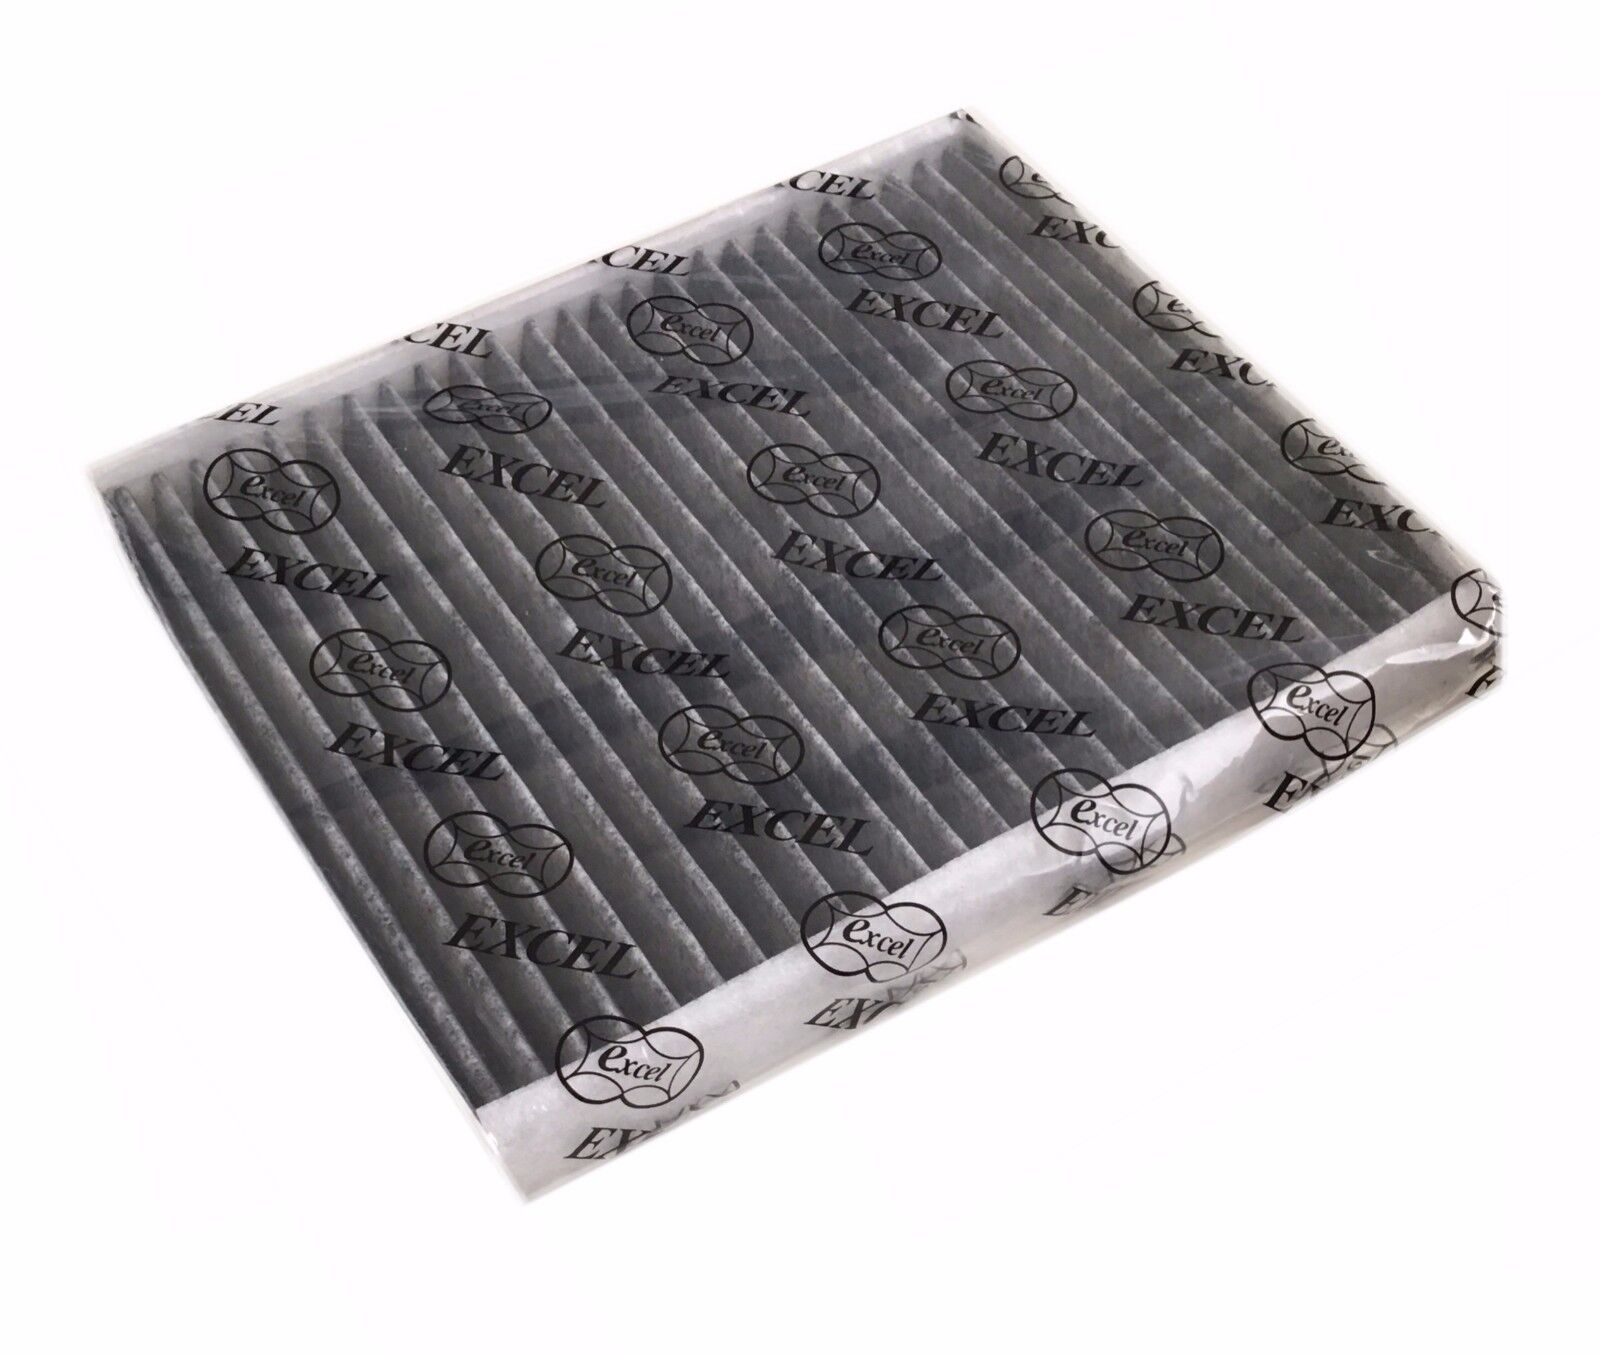 Carbonized Cabin air filter For NEW Ford Explorer Flex Taurus Lincoln MKS MKT